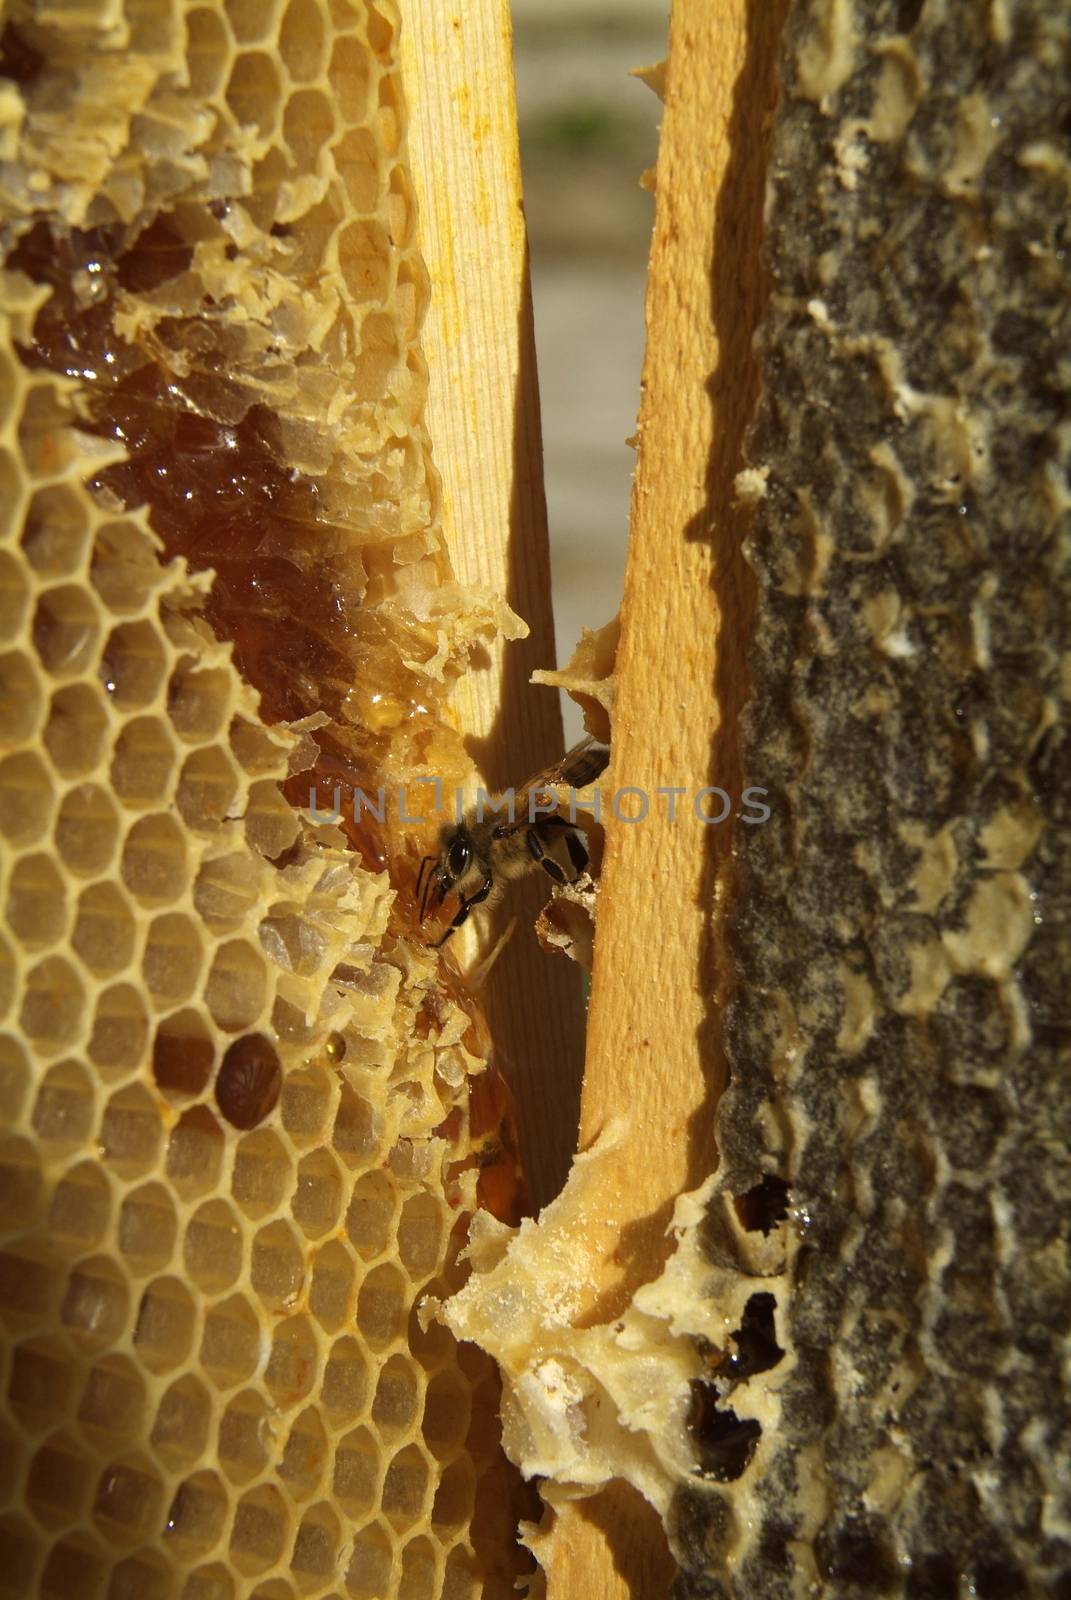 Bees in a beehive on honeycomb